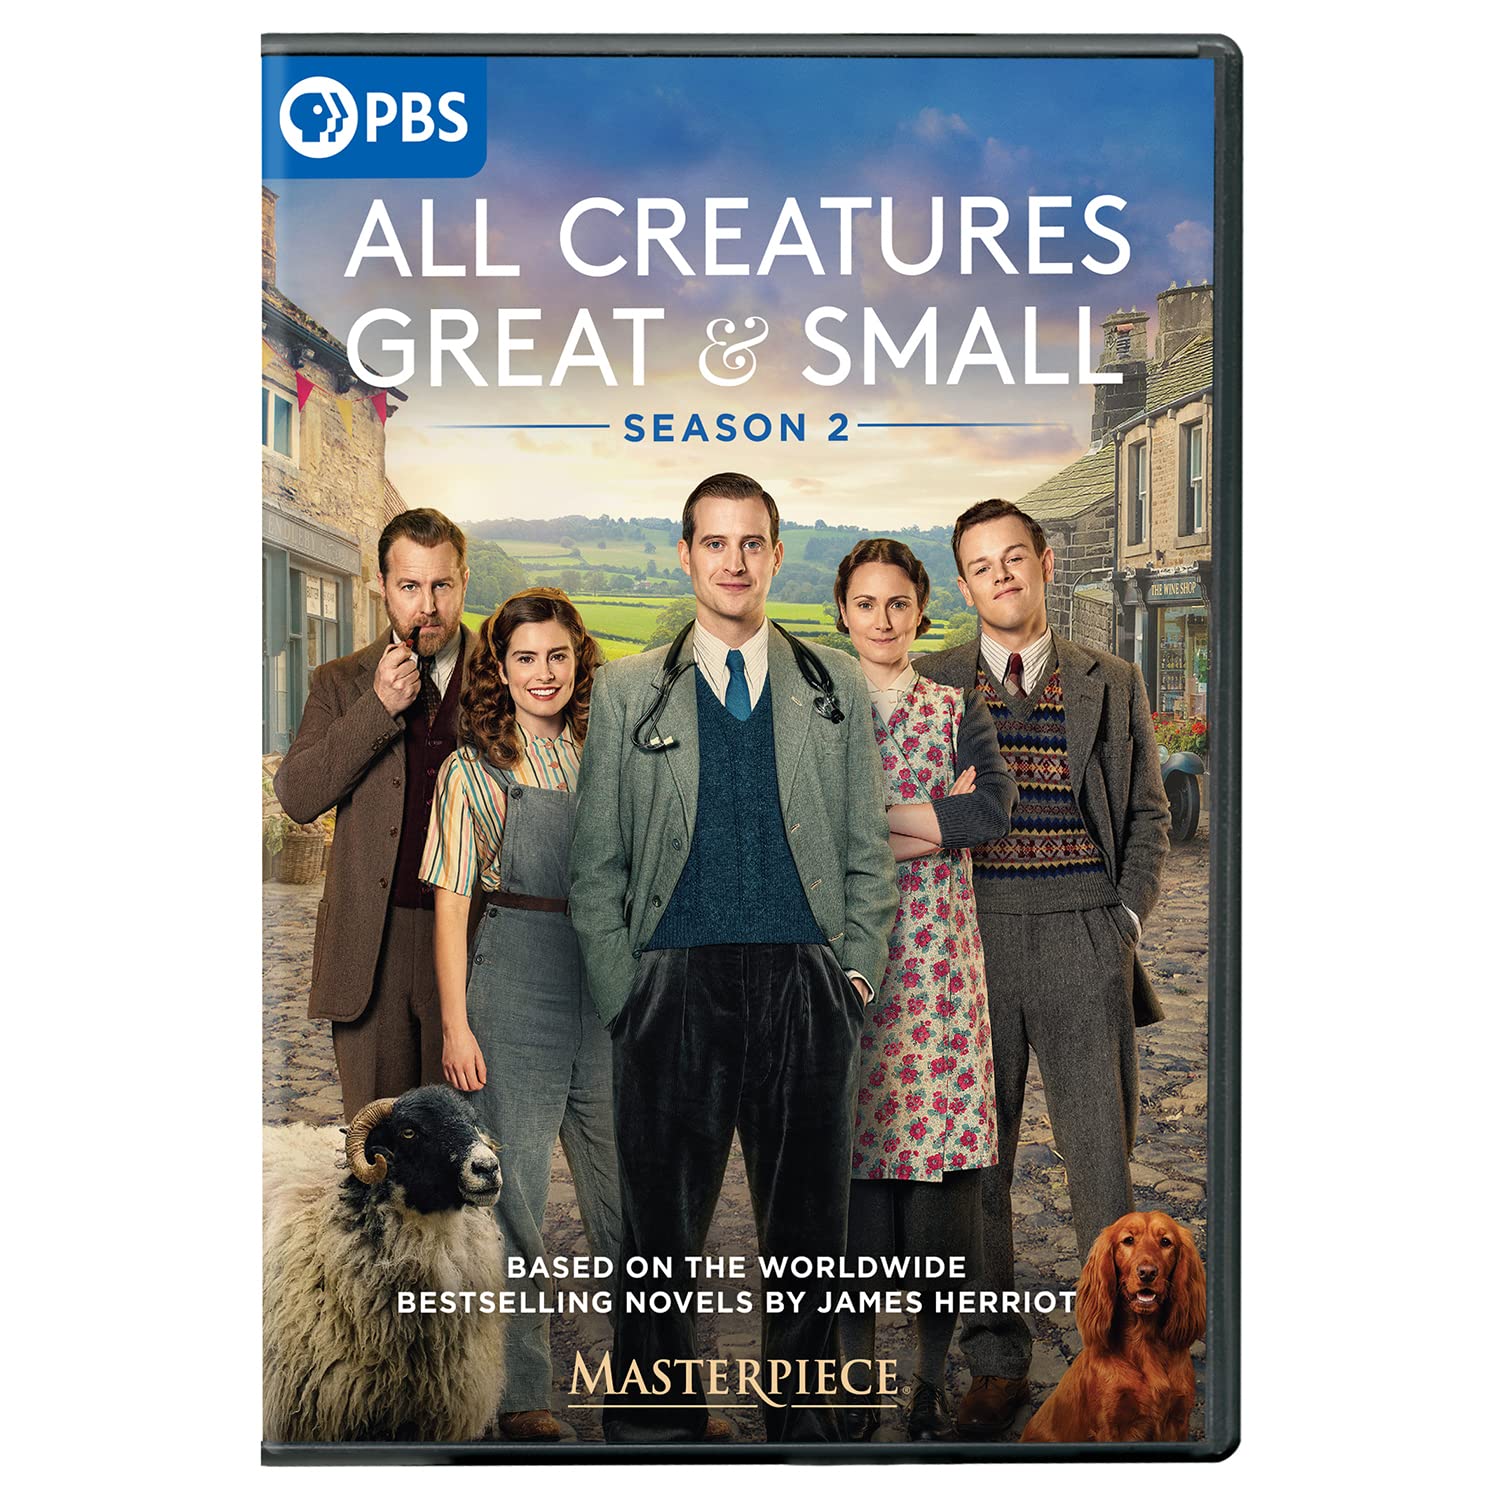 Image for "All Creatures Great and Small"